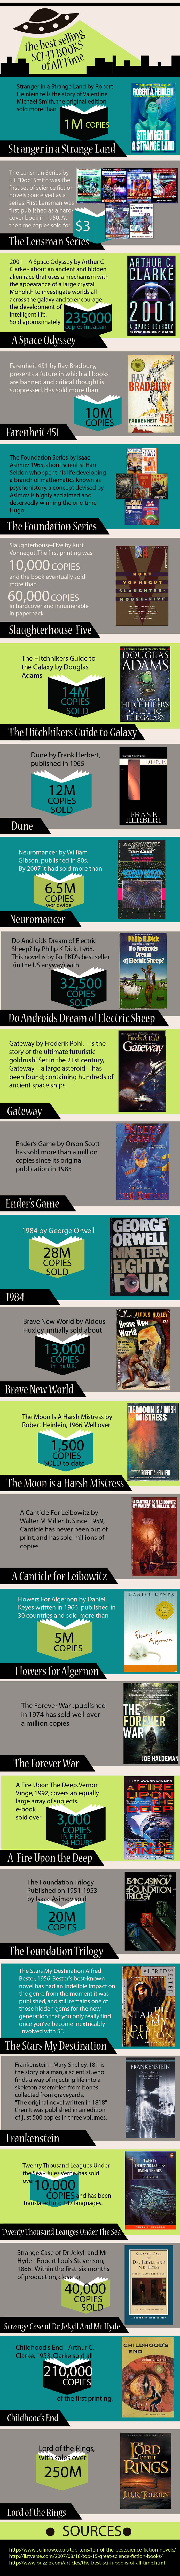 The Best Selling Sci-Fi Books of All Time Infographic